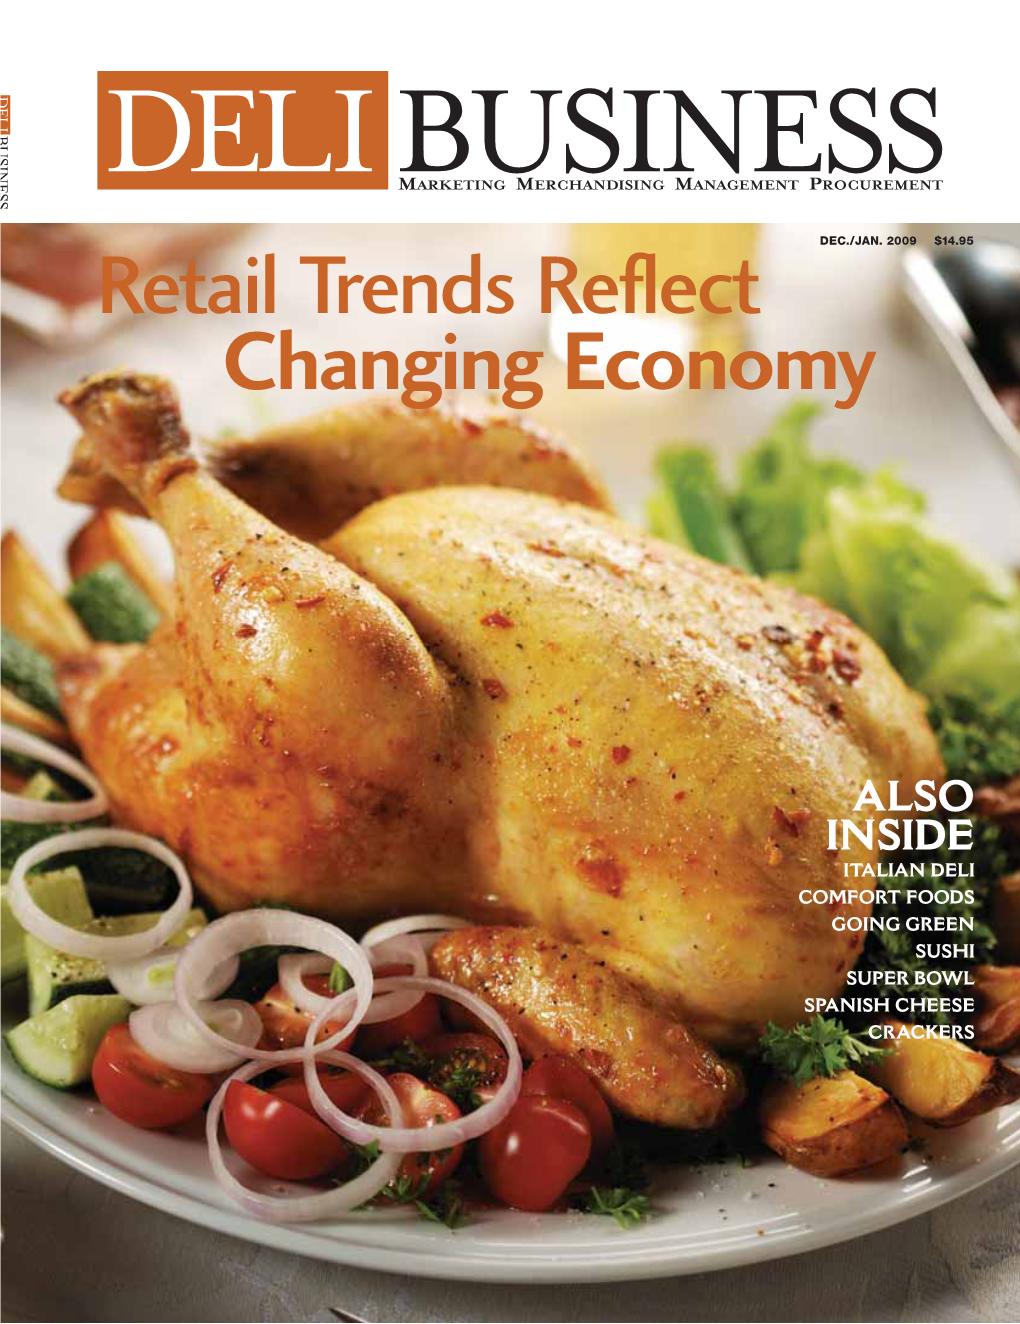 Retail Trends Reflect Changing Economy